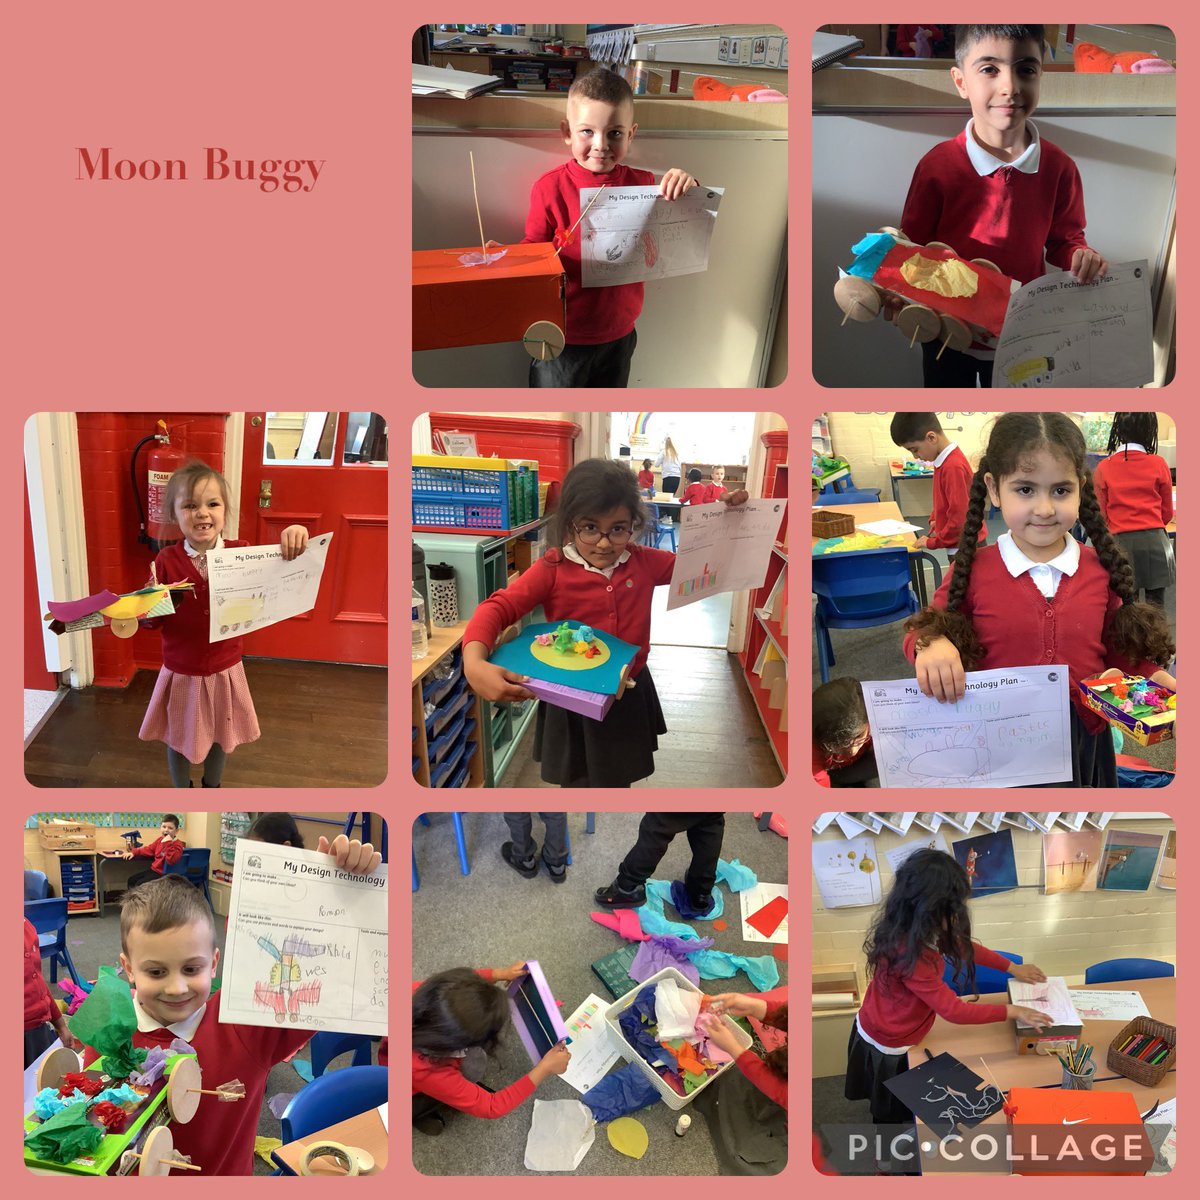 We have been working so hard to create a moon buggy with moving wheels. We have used all the skills and investigation knowledge for our final project. @Mrs_Crellin @FallaParkSchool @Miss_Carr_Falla